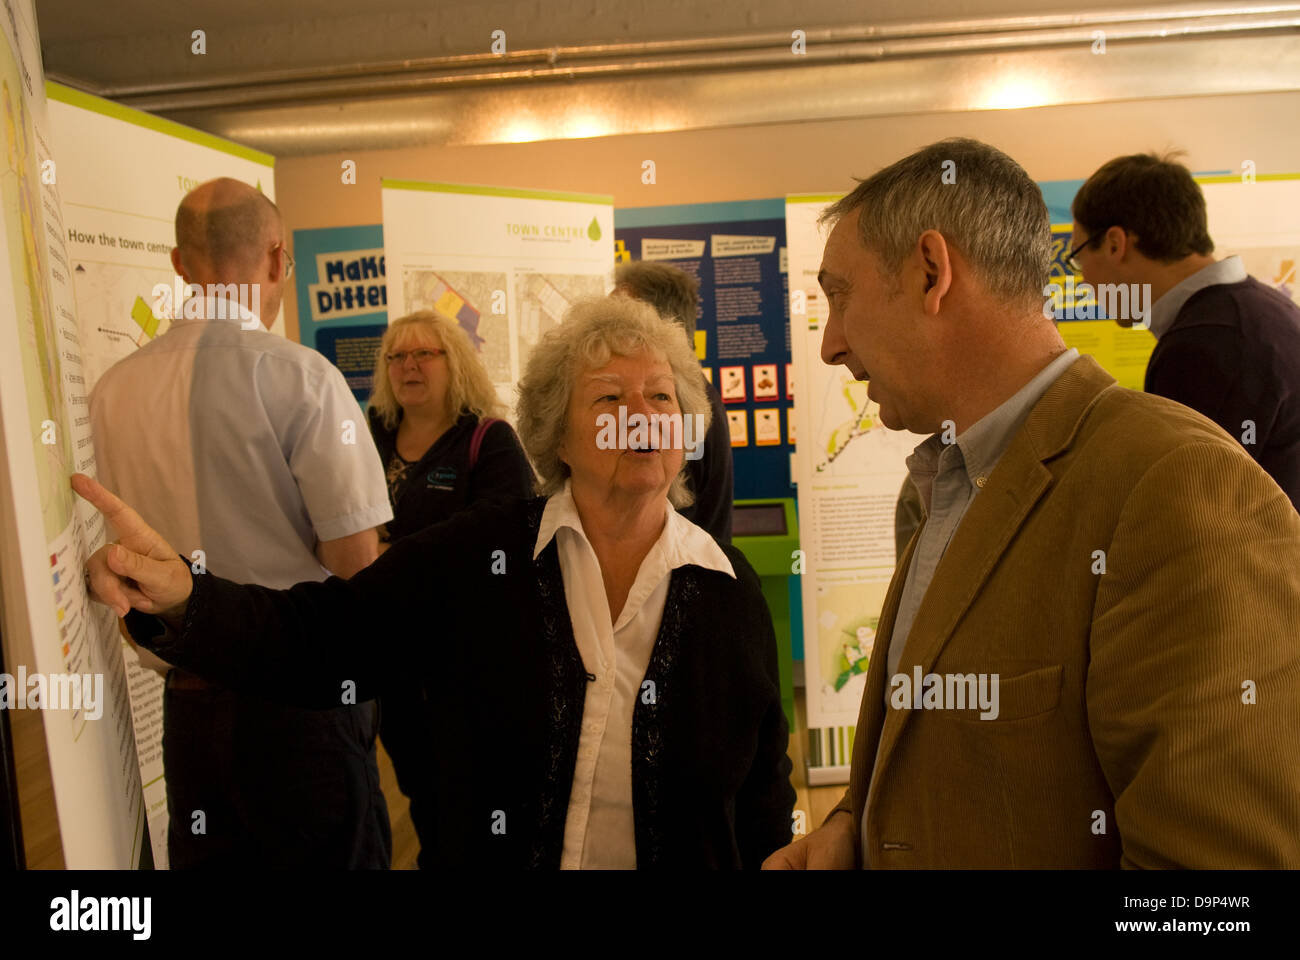 Local residents & town planners discussing & perusing plans for new eco town at Eco Station, Bordon, Hampshire, UK. Stock Photo